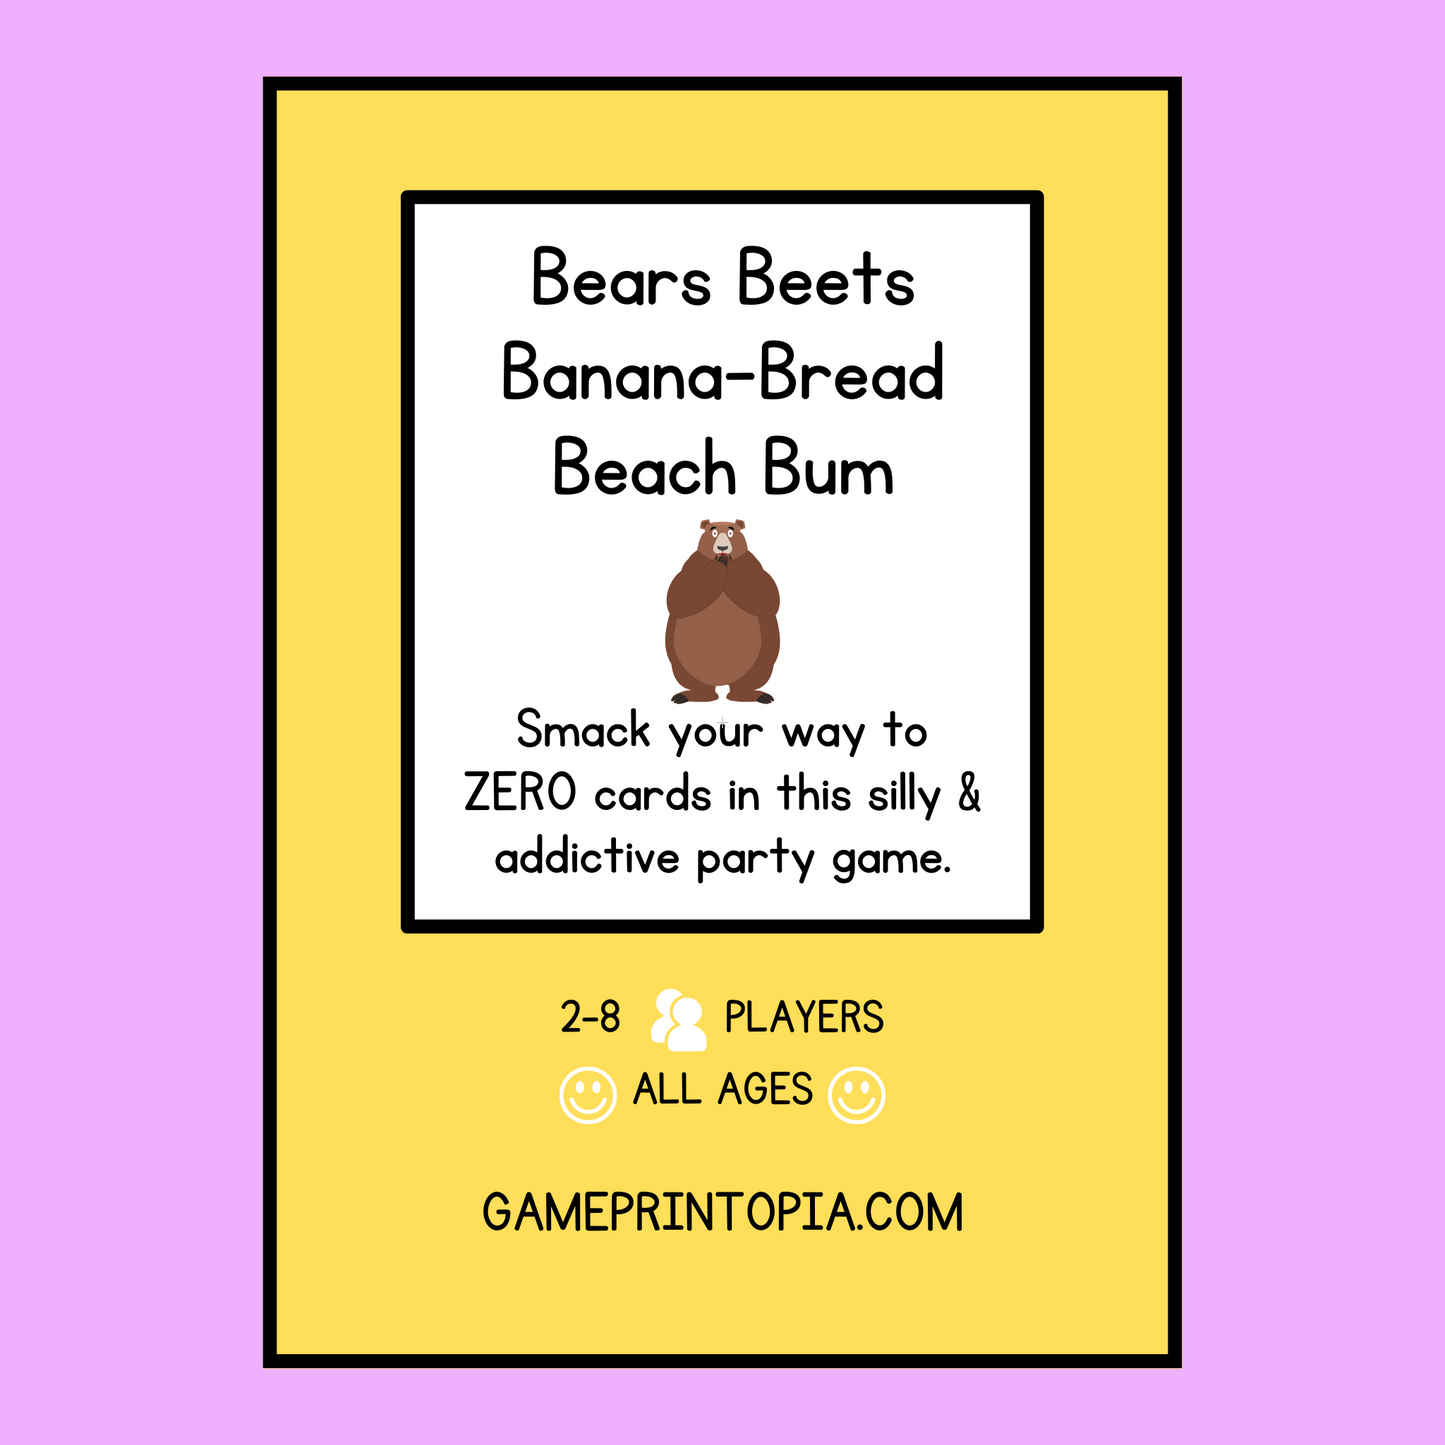 Cover image of the "print and play" party card game Bears Beets Banana-Bread Beach Bum, by Gameprintopia